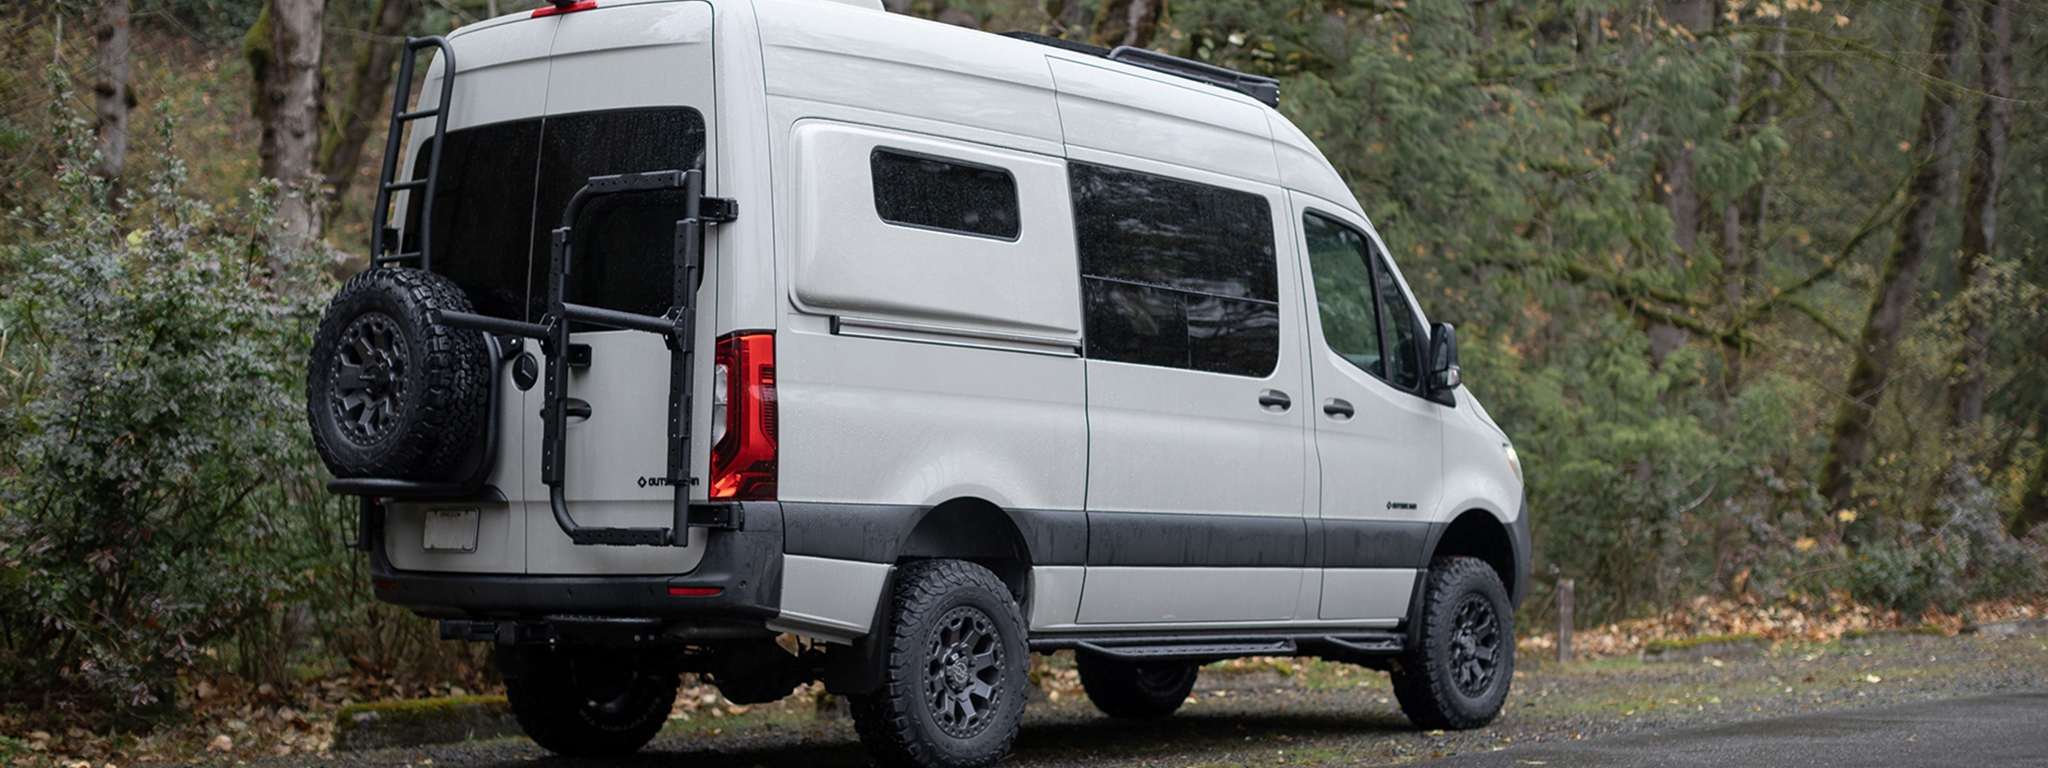 White van with rear ladder and spare tire carrier parked in a forest